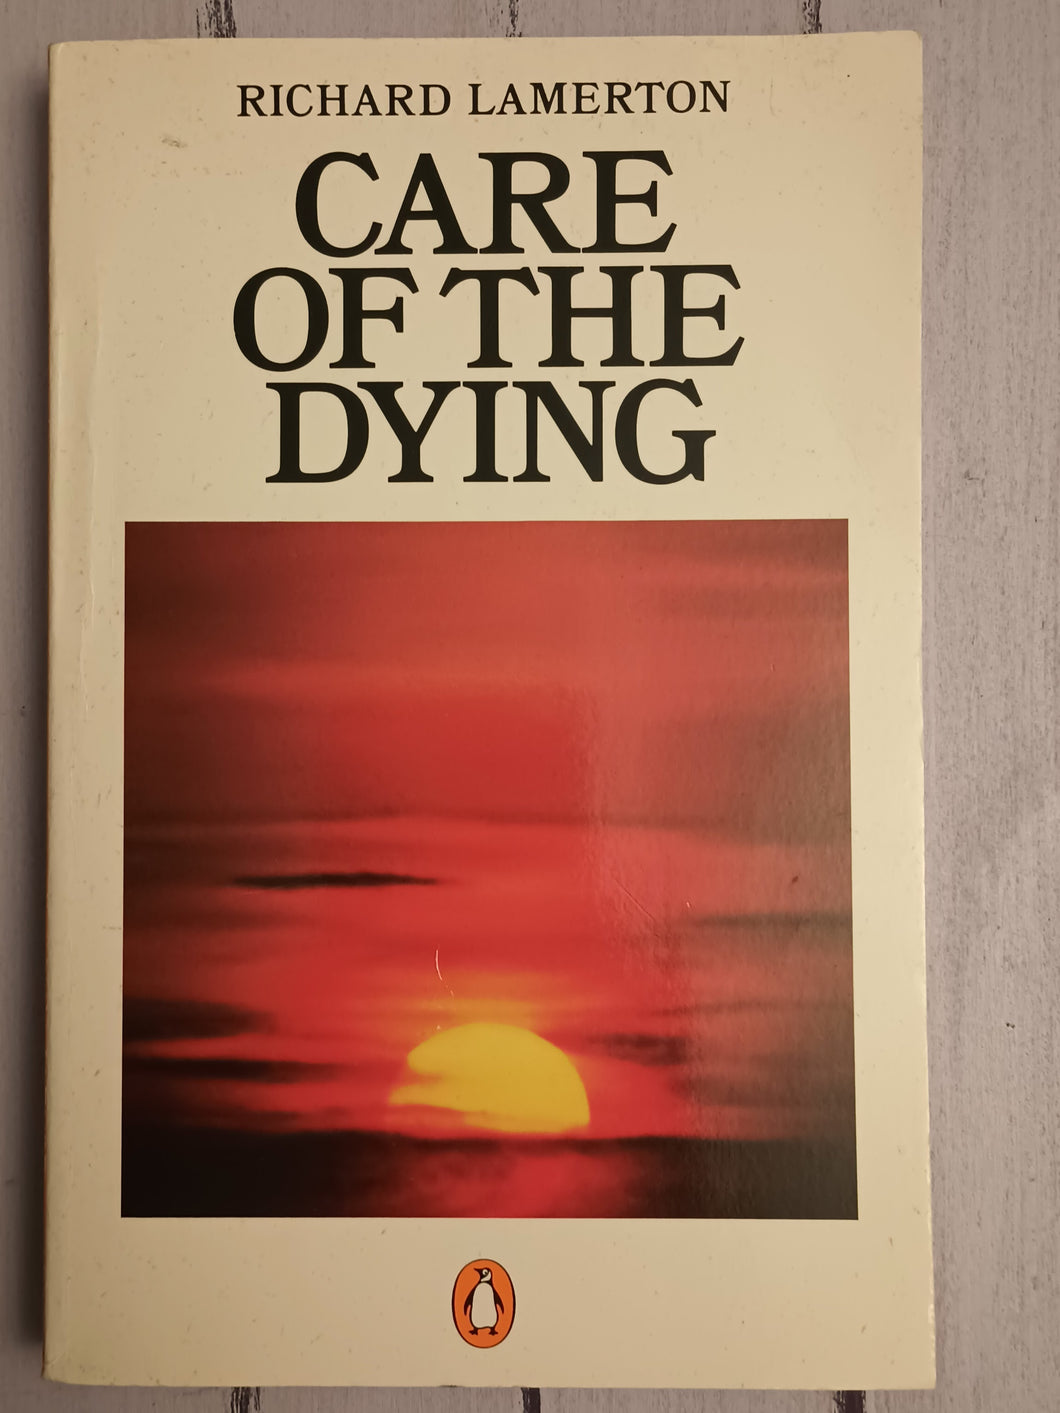 Care of The Dying